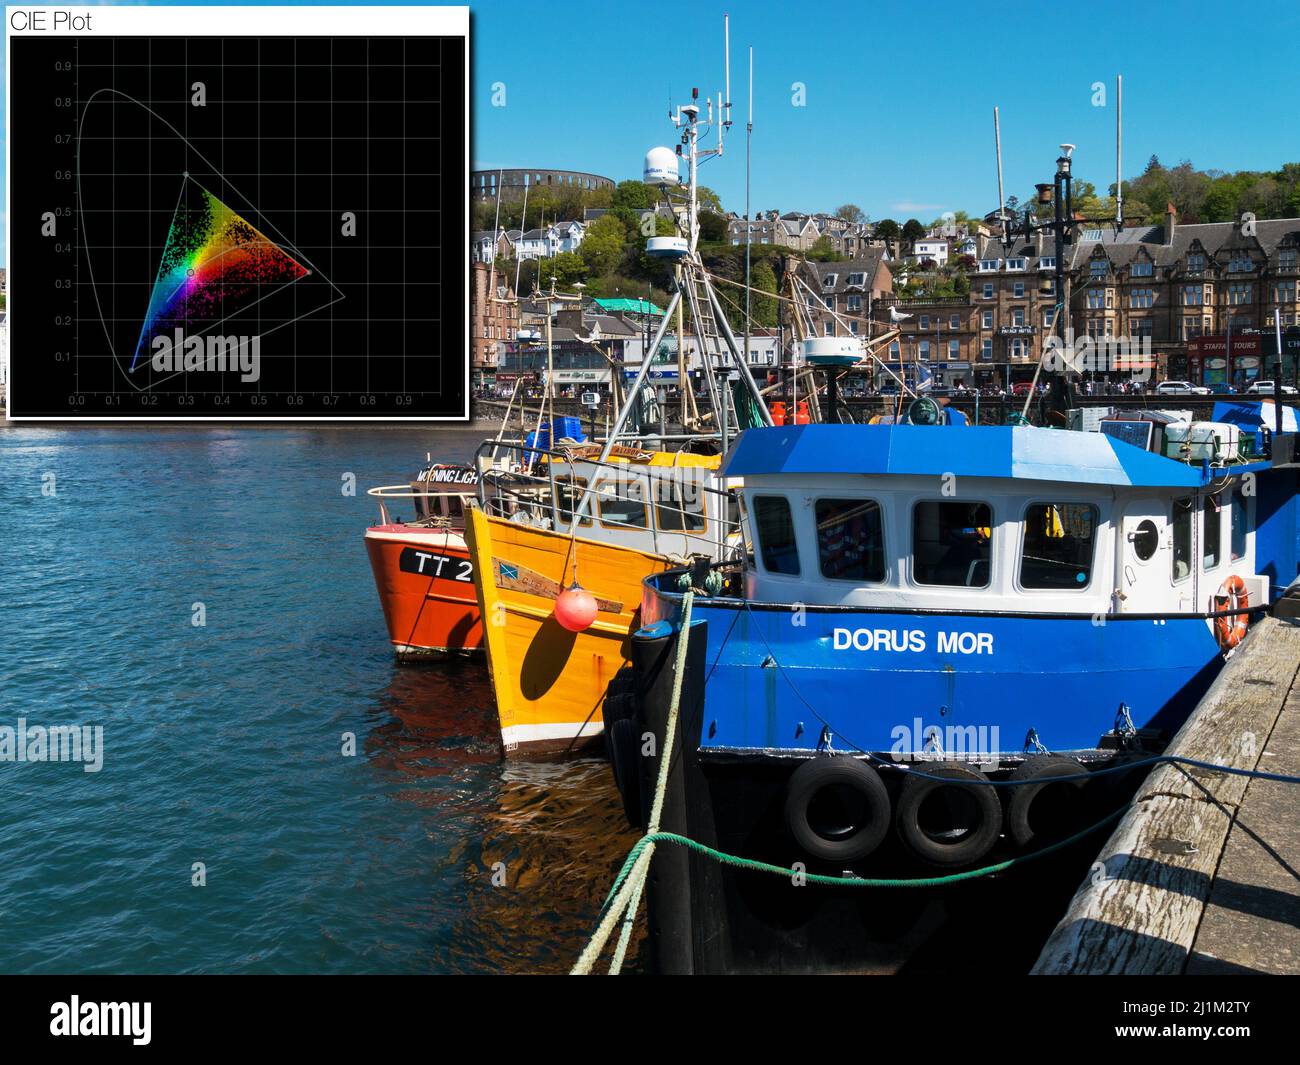 Montage showing colourful scene with inset CIE plot analysis of the colours in the image. (Analysis performed using Nobe Omniscope software). Stock Photo